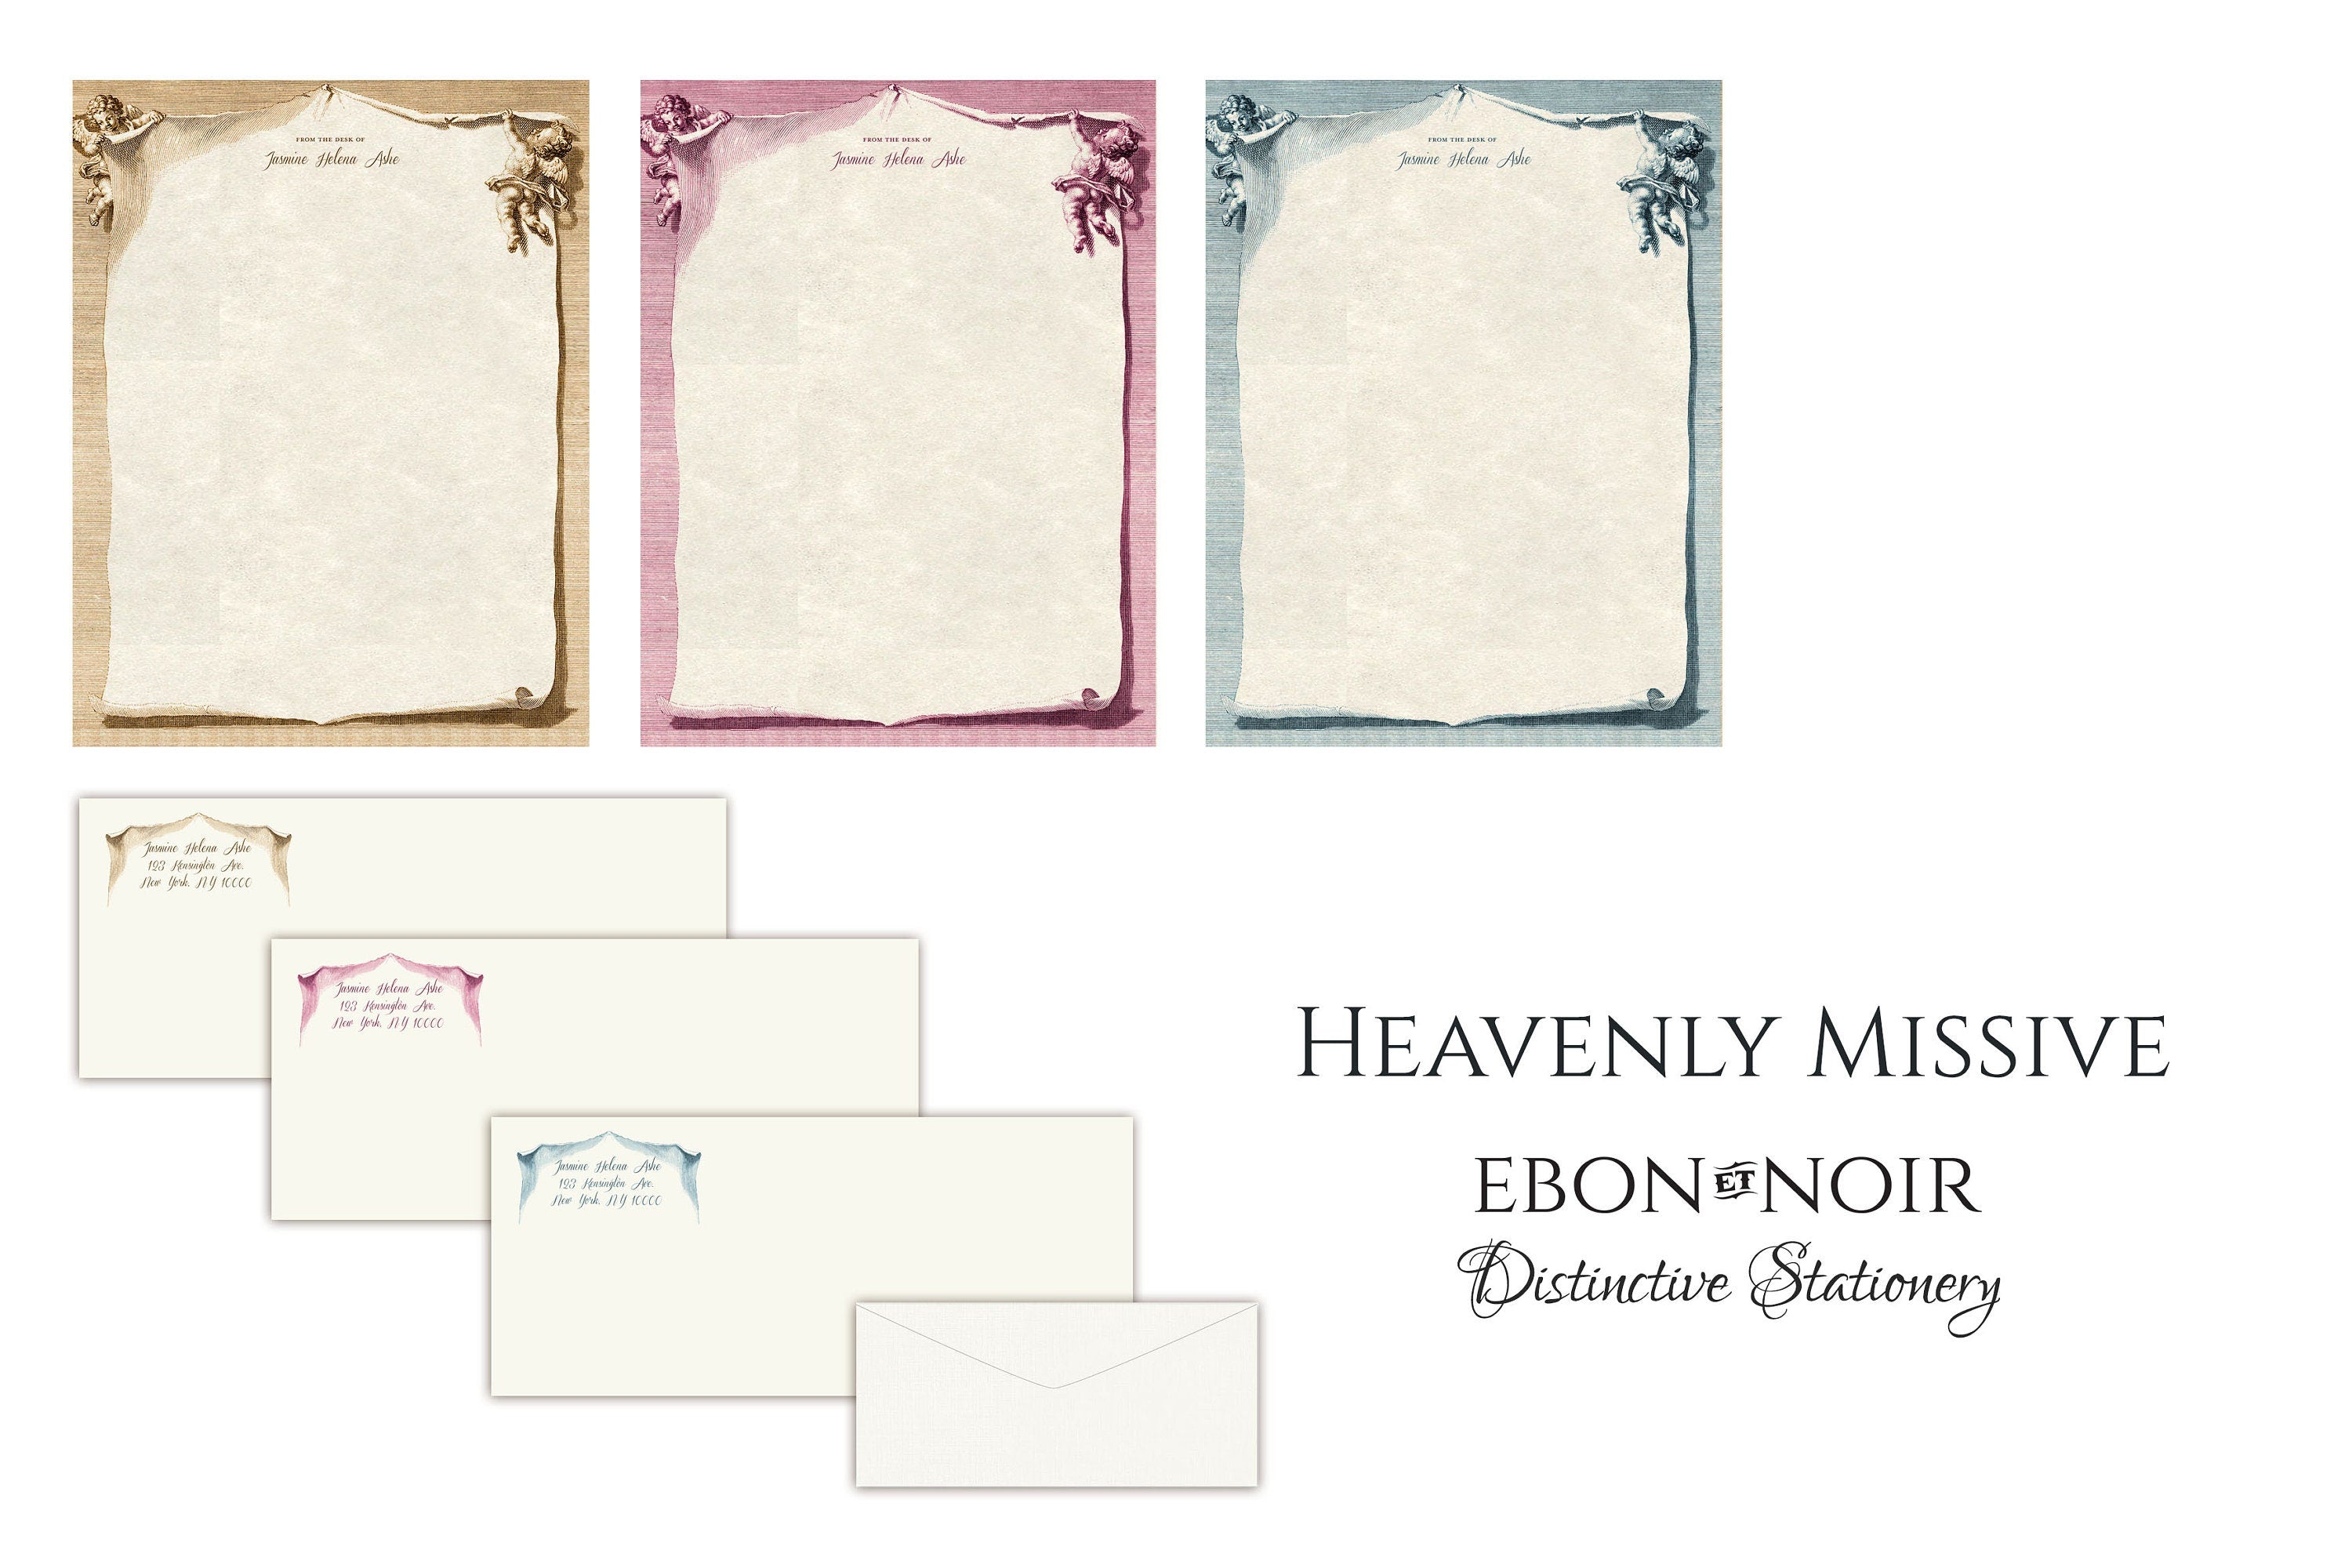 Heavenly Missive, Luxurious Handcrafted Stationery Set for Letter Writing, Personalized, 12 Sheets/10 Envelopes, Available in 3 Colors